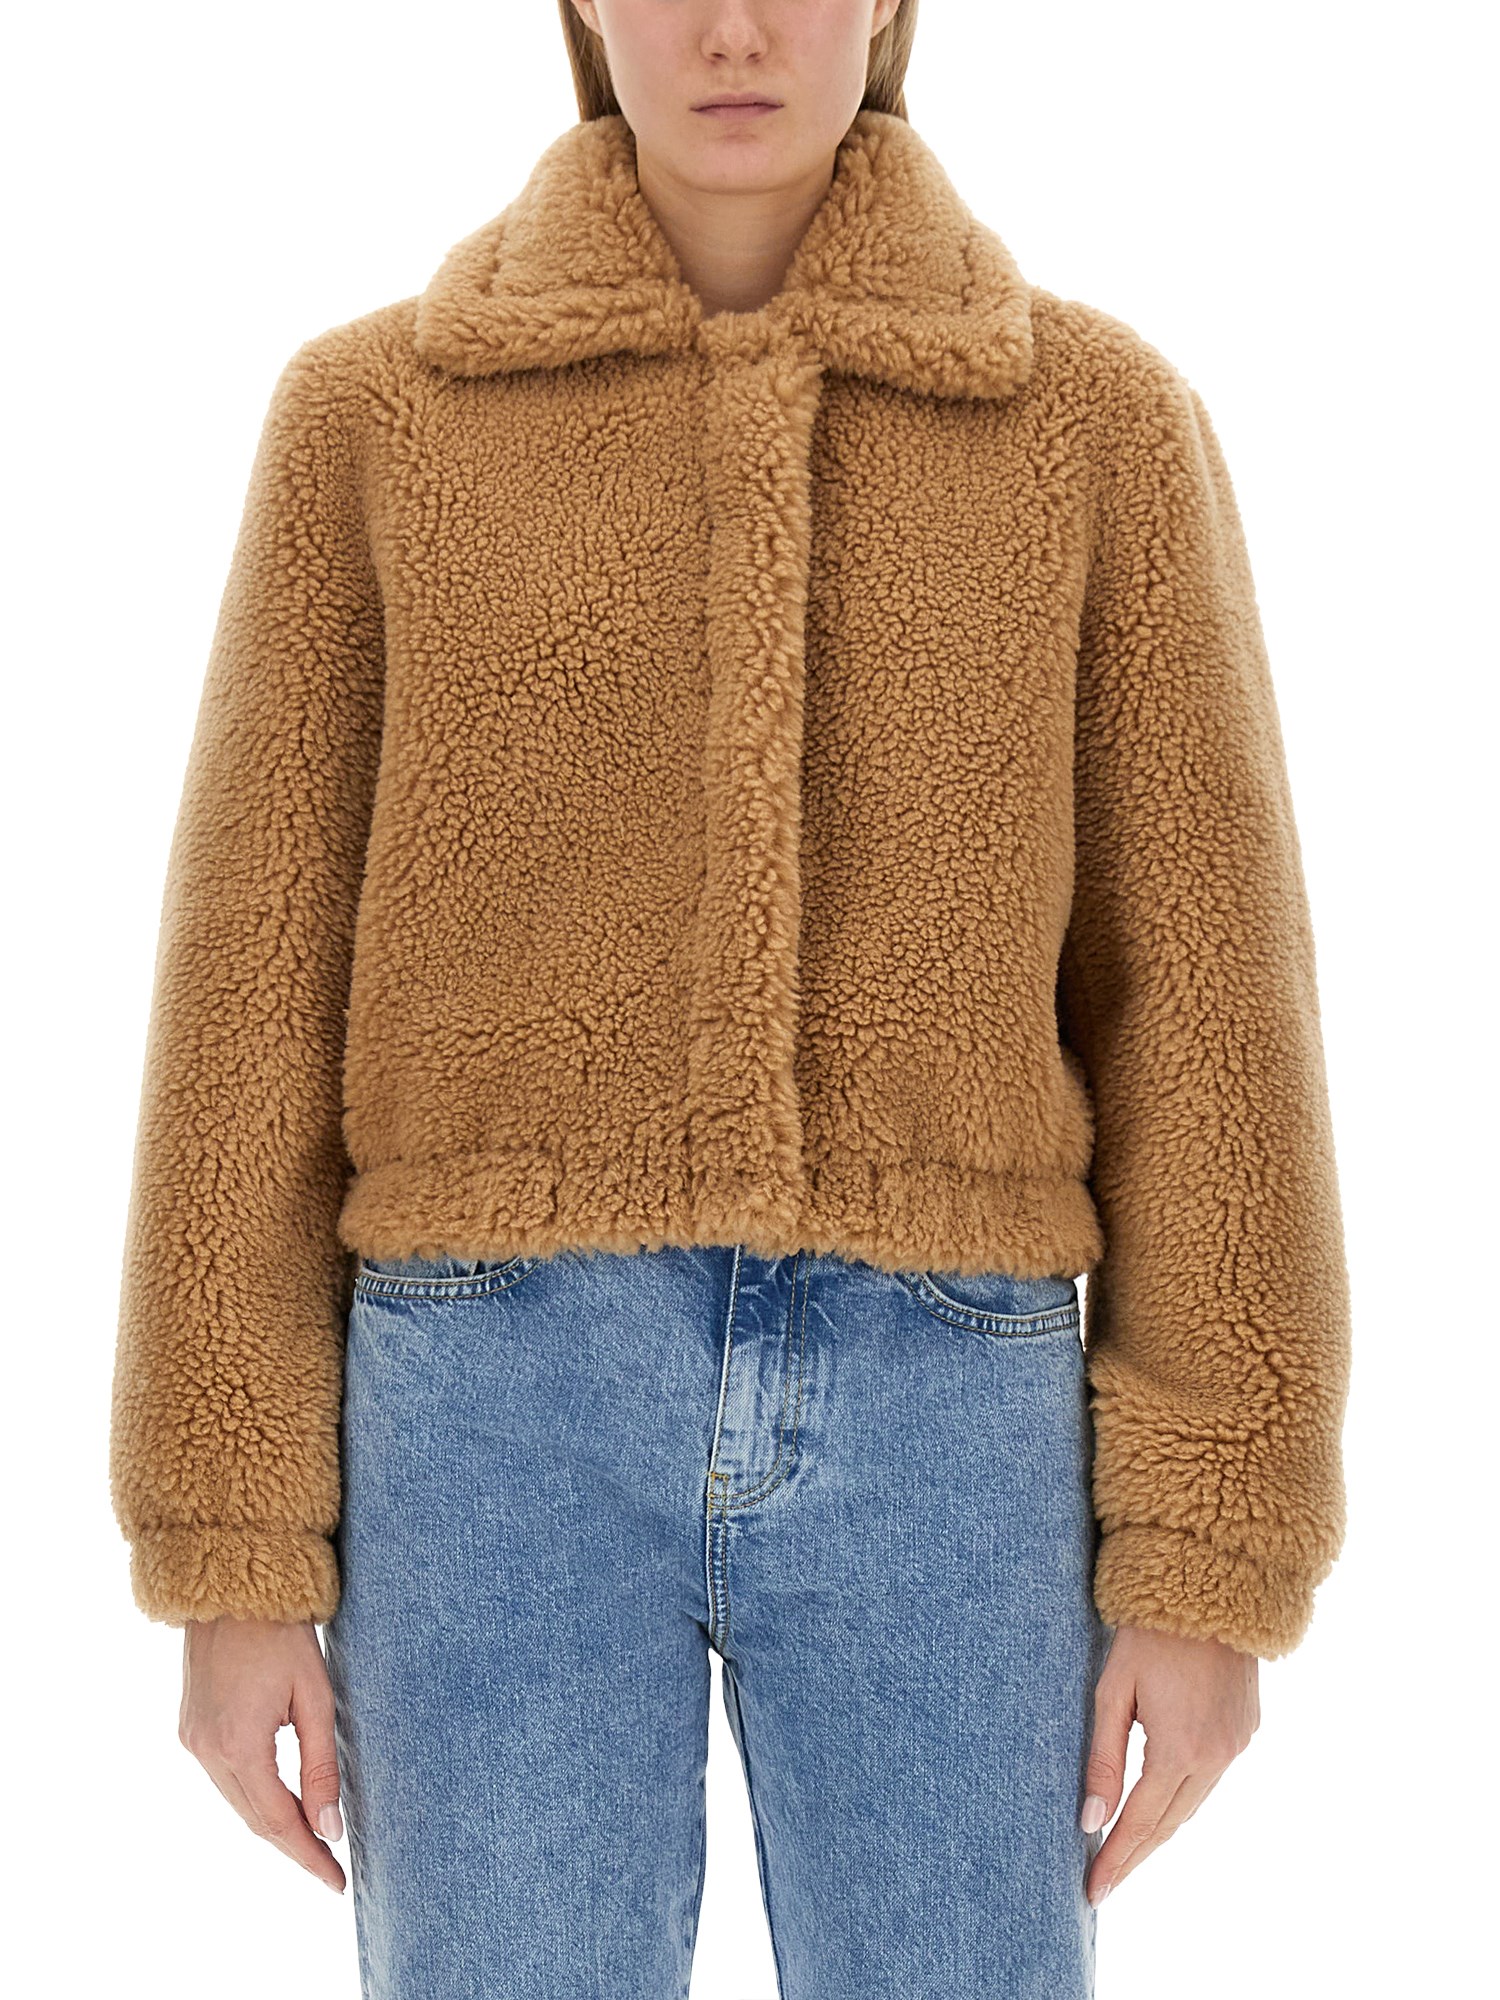 Moschino Jeans moschino jeans furry effect jacket